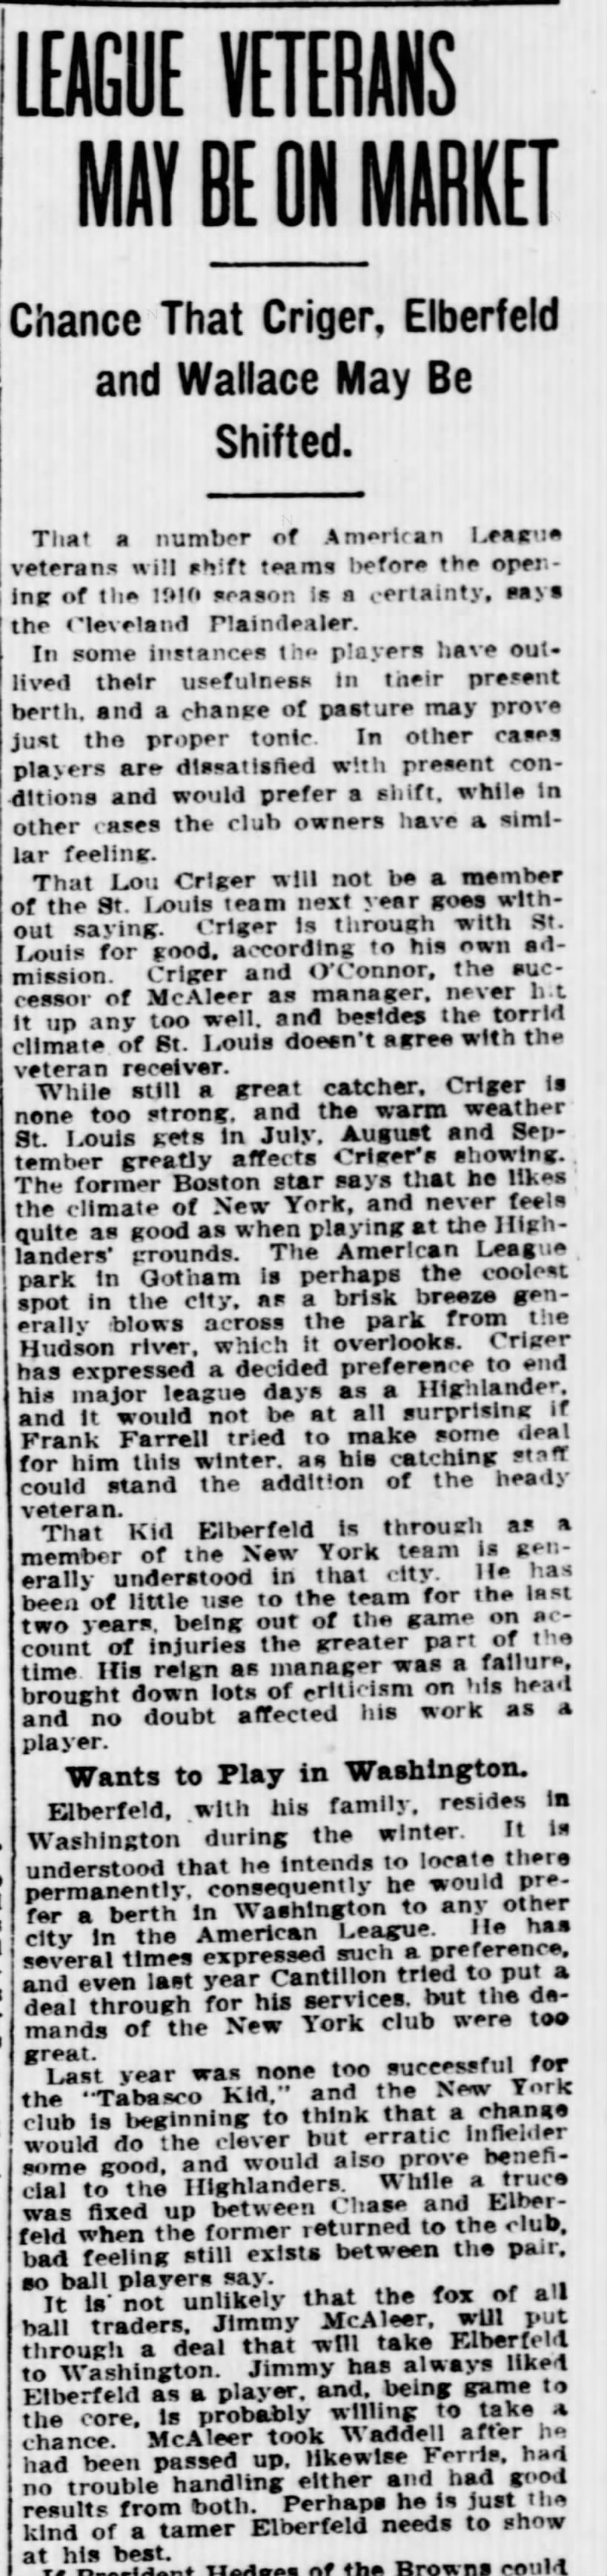 Evening Star (Washington, District of Columbia) 14 Nov 1909, Sun Page 64
- Elberfeld out of NY